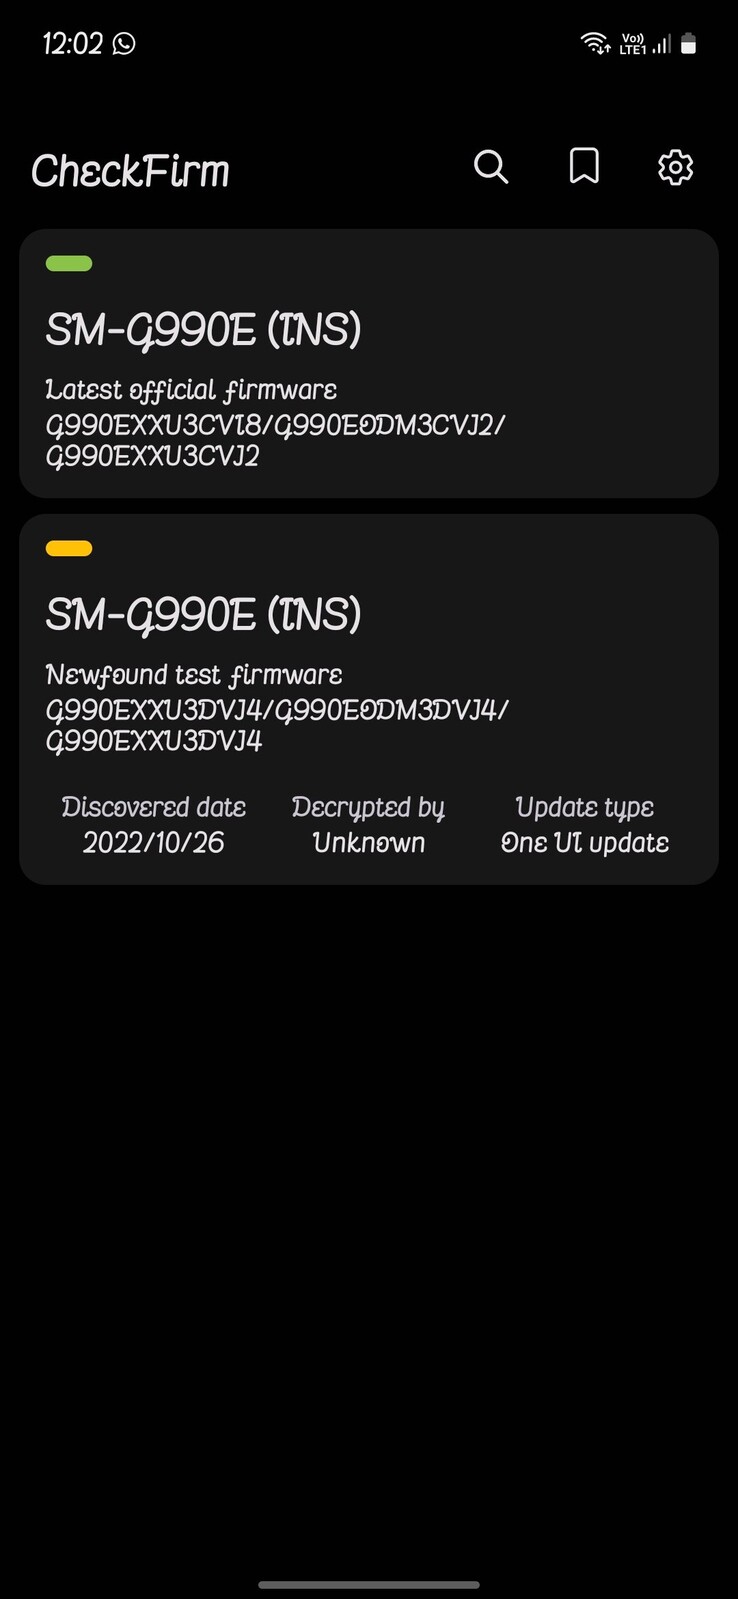 One UI 5 for the Galaxy S21 FE reportedly leaks out. (Source: Samsung One UI Software Update via Twitter)